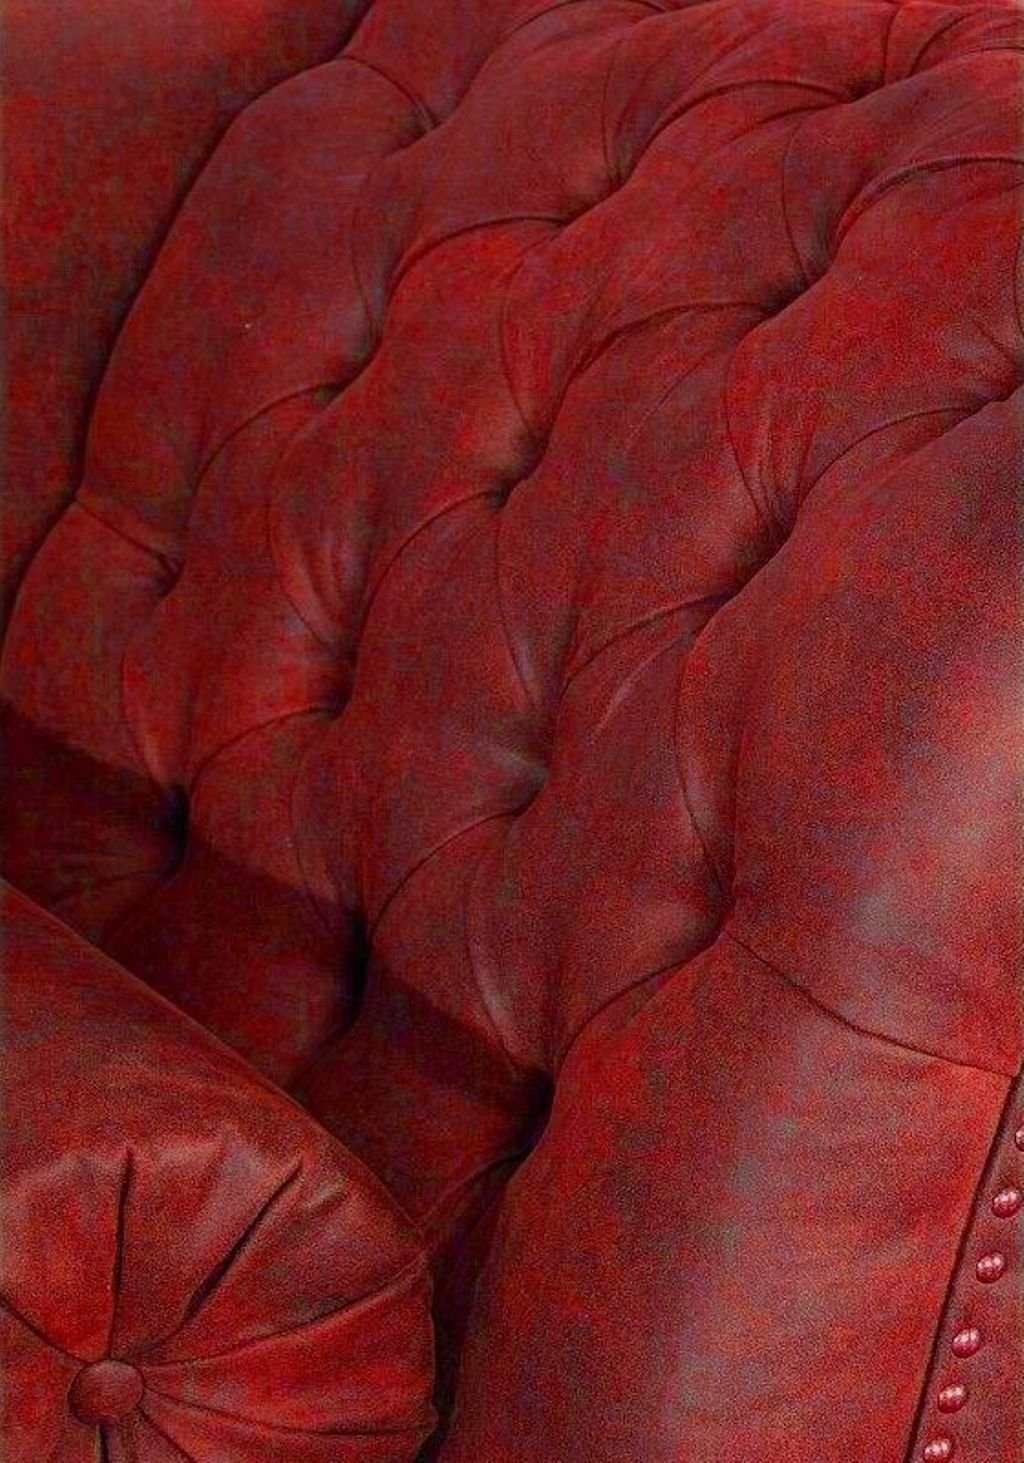 JVmoebel Chaiselongue Liege Relax SOFORT, Rot Europa Sofa Chaiselongues Chaise Chesterfield 1 Made Textil in Teile